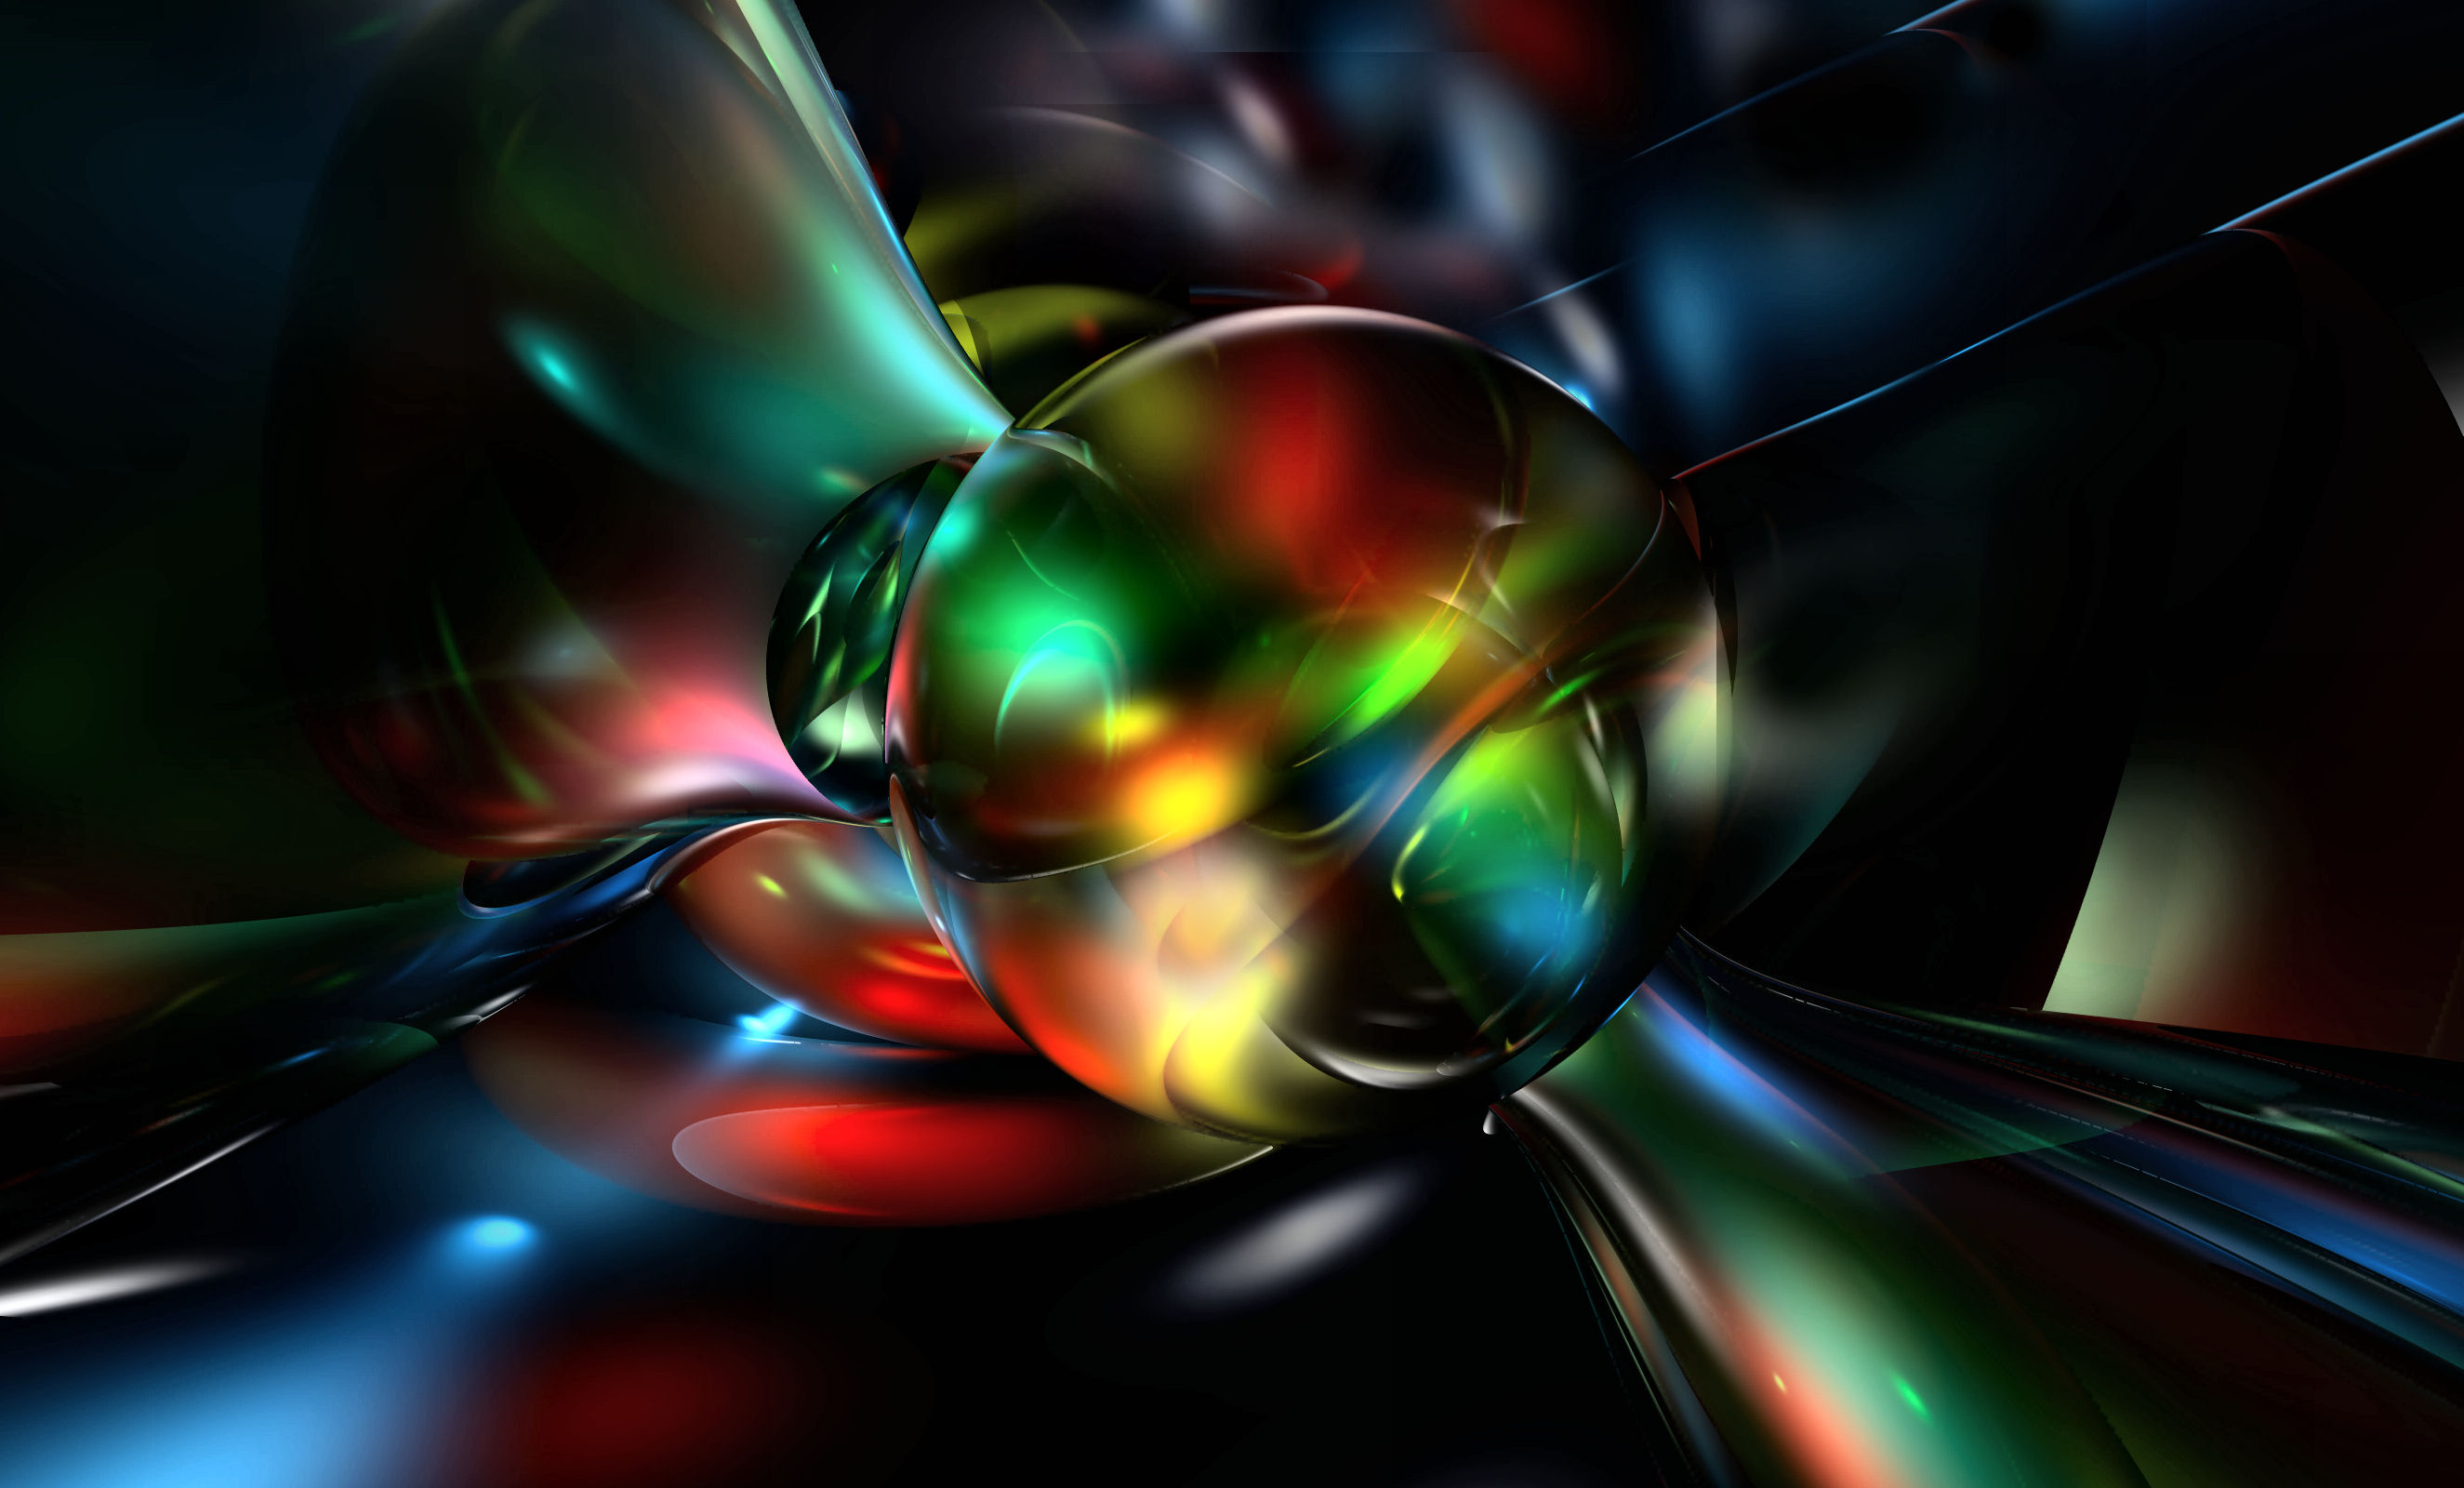 Really Cool Awesome Abstract 3d Desktop Wallpaper Car Pictures